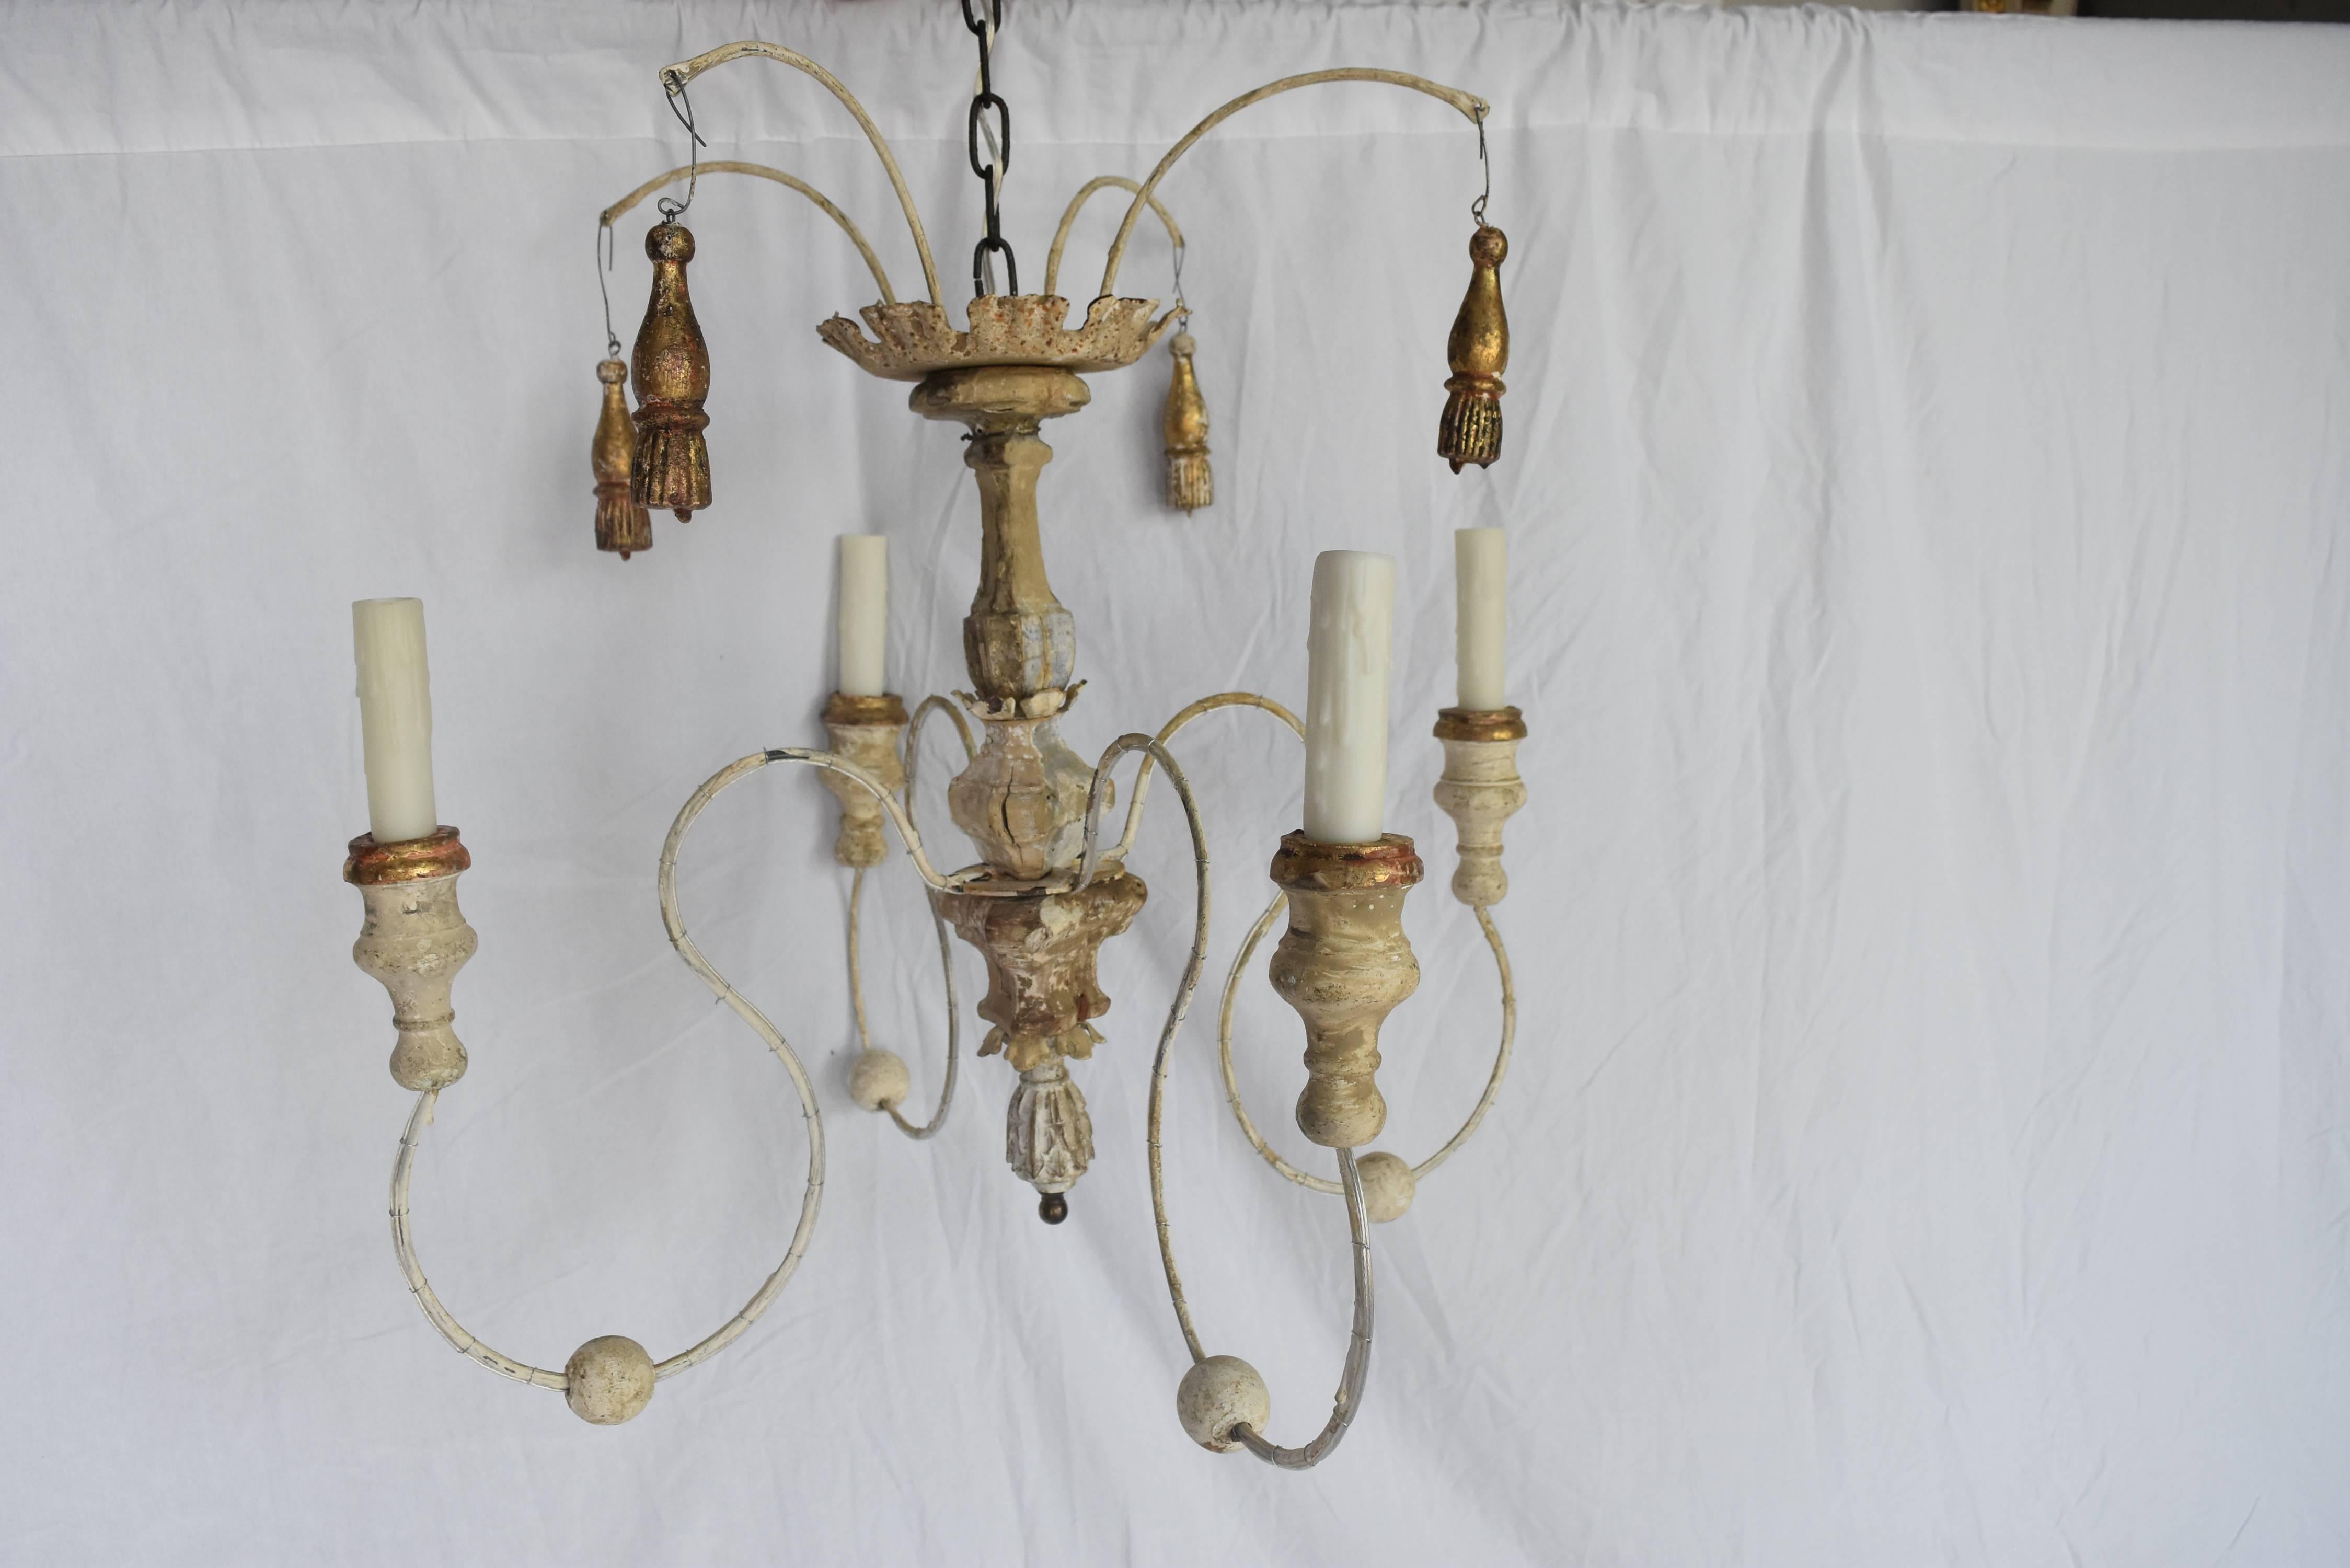 Italian Wooden Altar Elements Spider Chandelier with Iron Arms 1